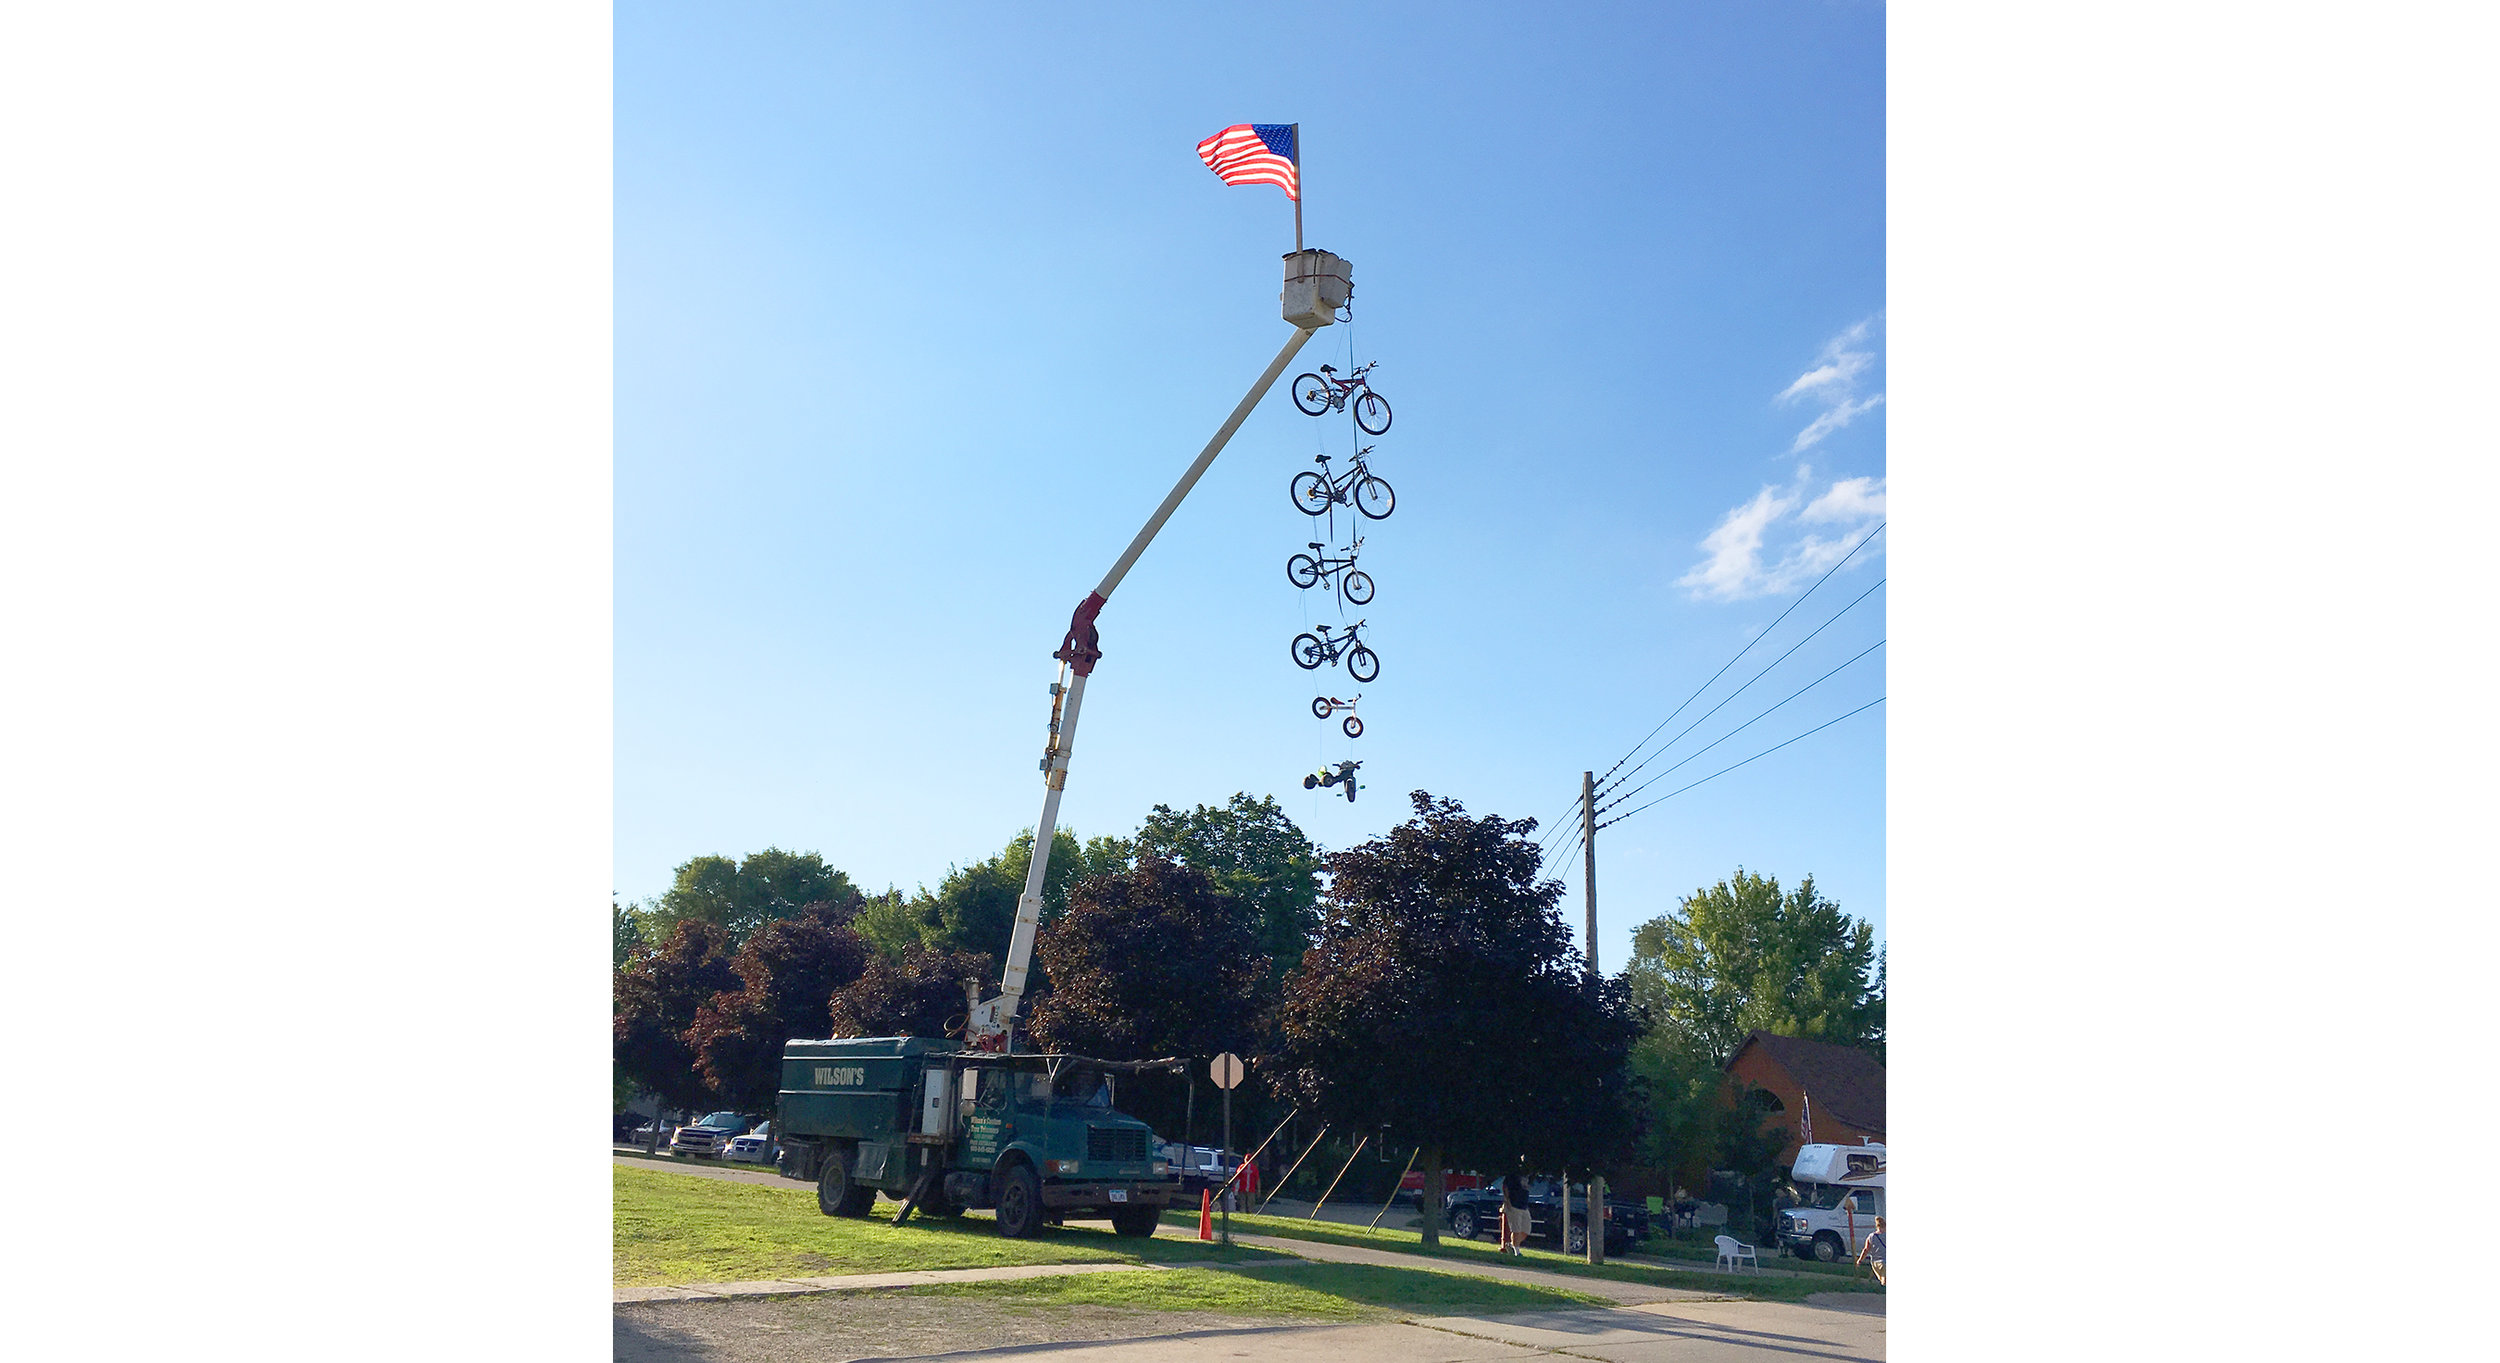  The folks in Cresco got creative with this hanging bike sculpture. 